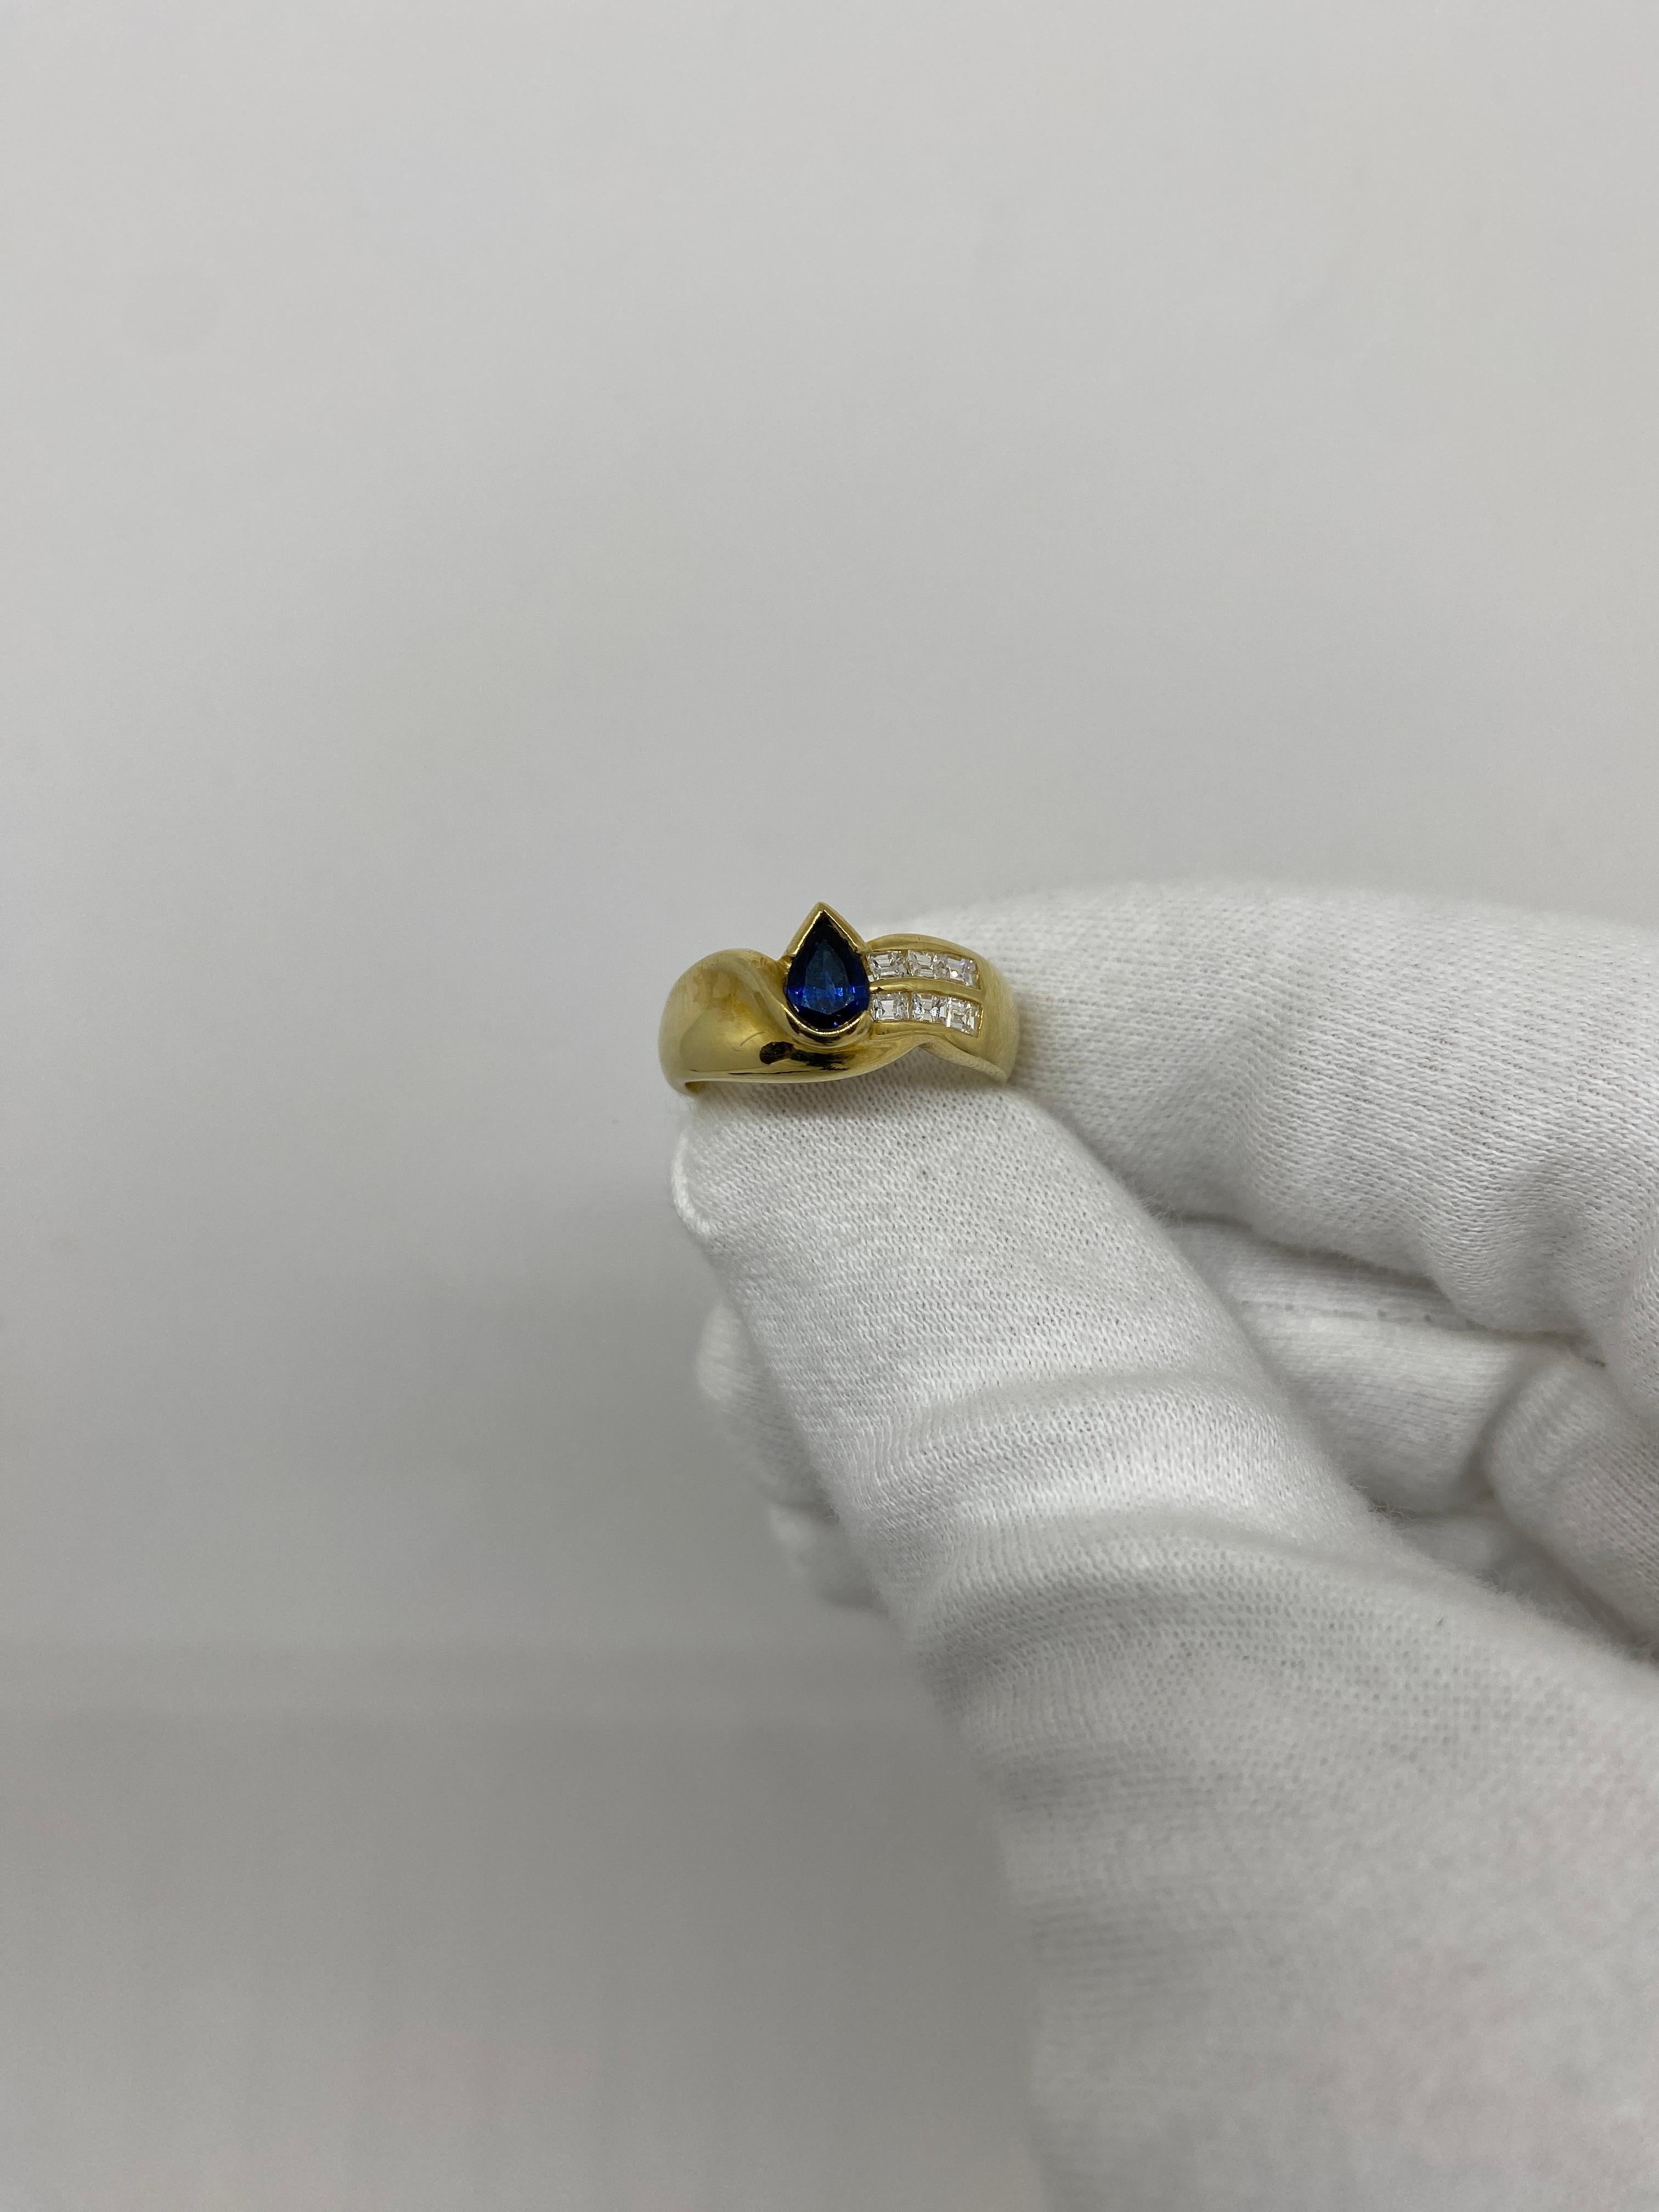 Ring made of 18kt yellow gold with drop-cut blue sapphire for ct.0.61 and natural white Baguette-cut diamonds for ct.0.31

Welcome to our jewelry collection, where every piece tells a story of timeless elegance and unparalleled craftsmanship. As a